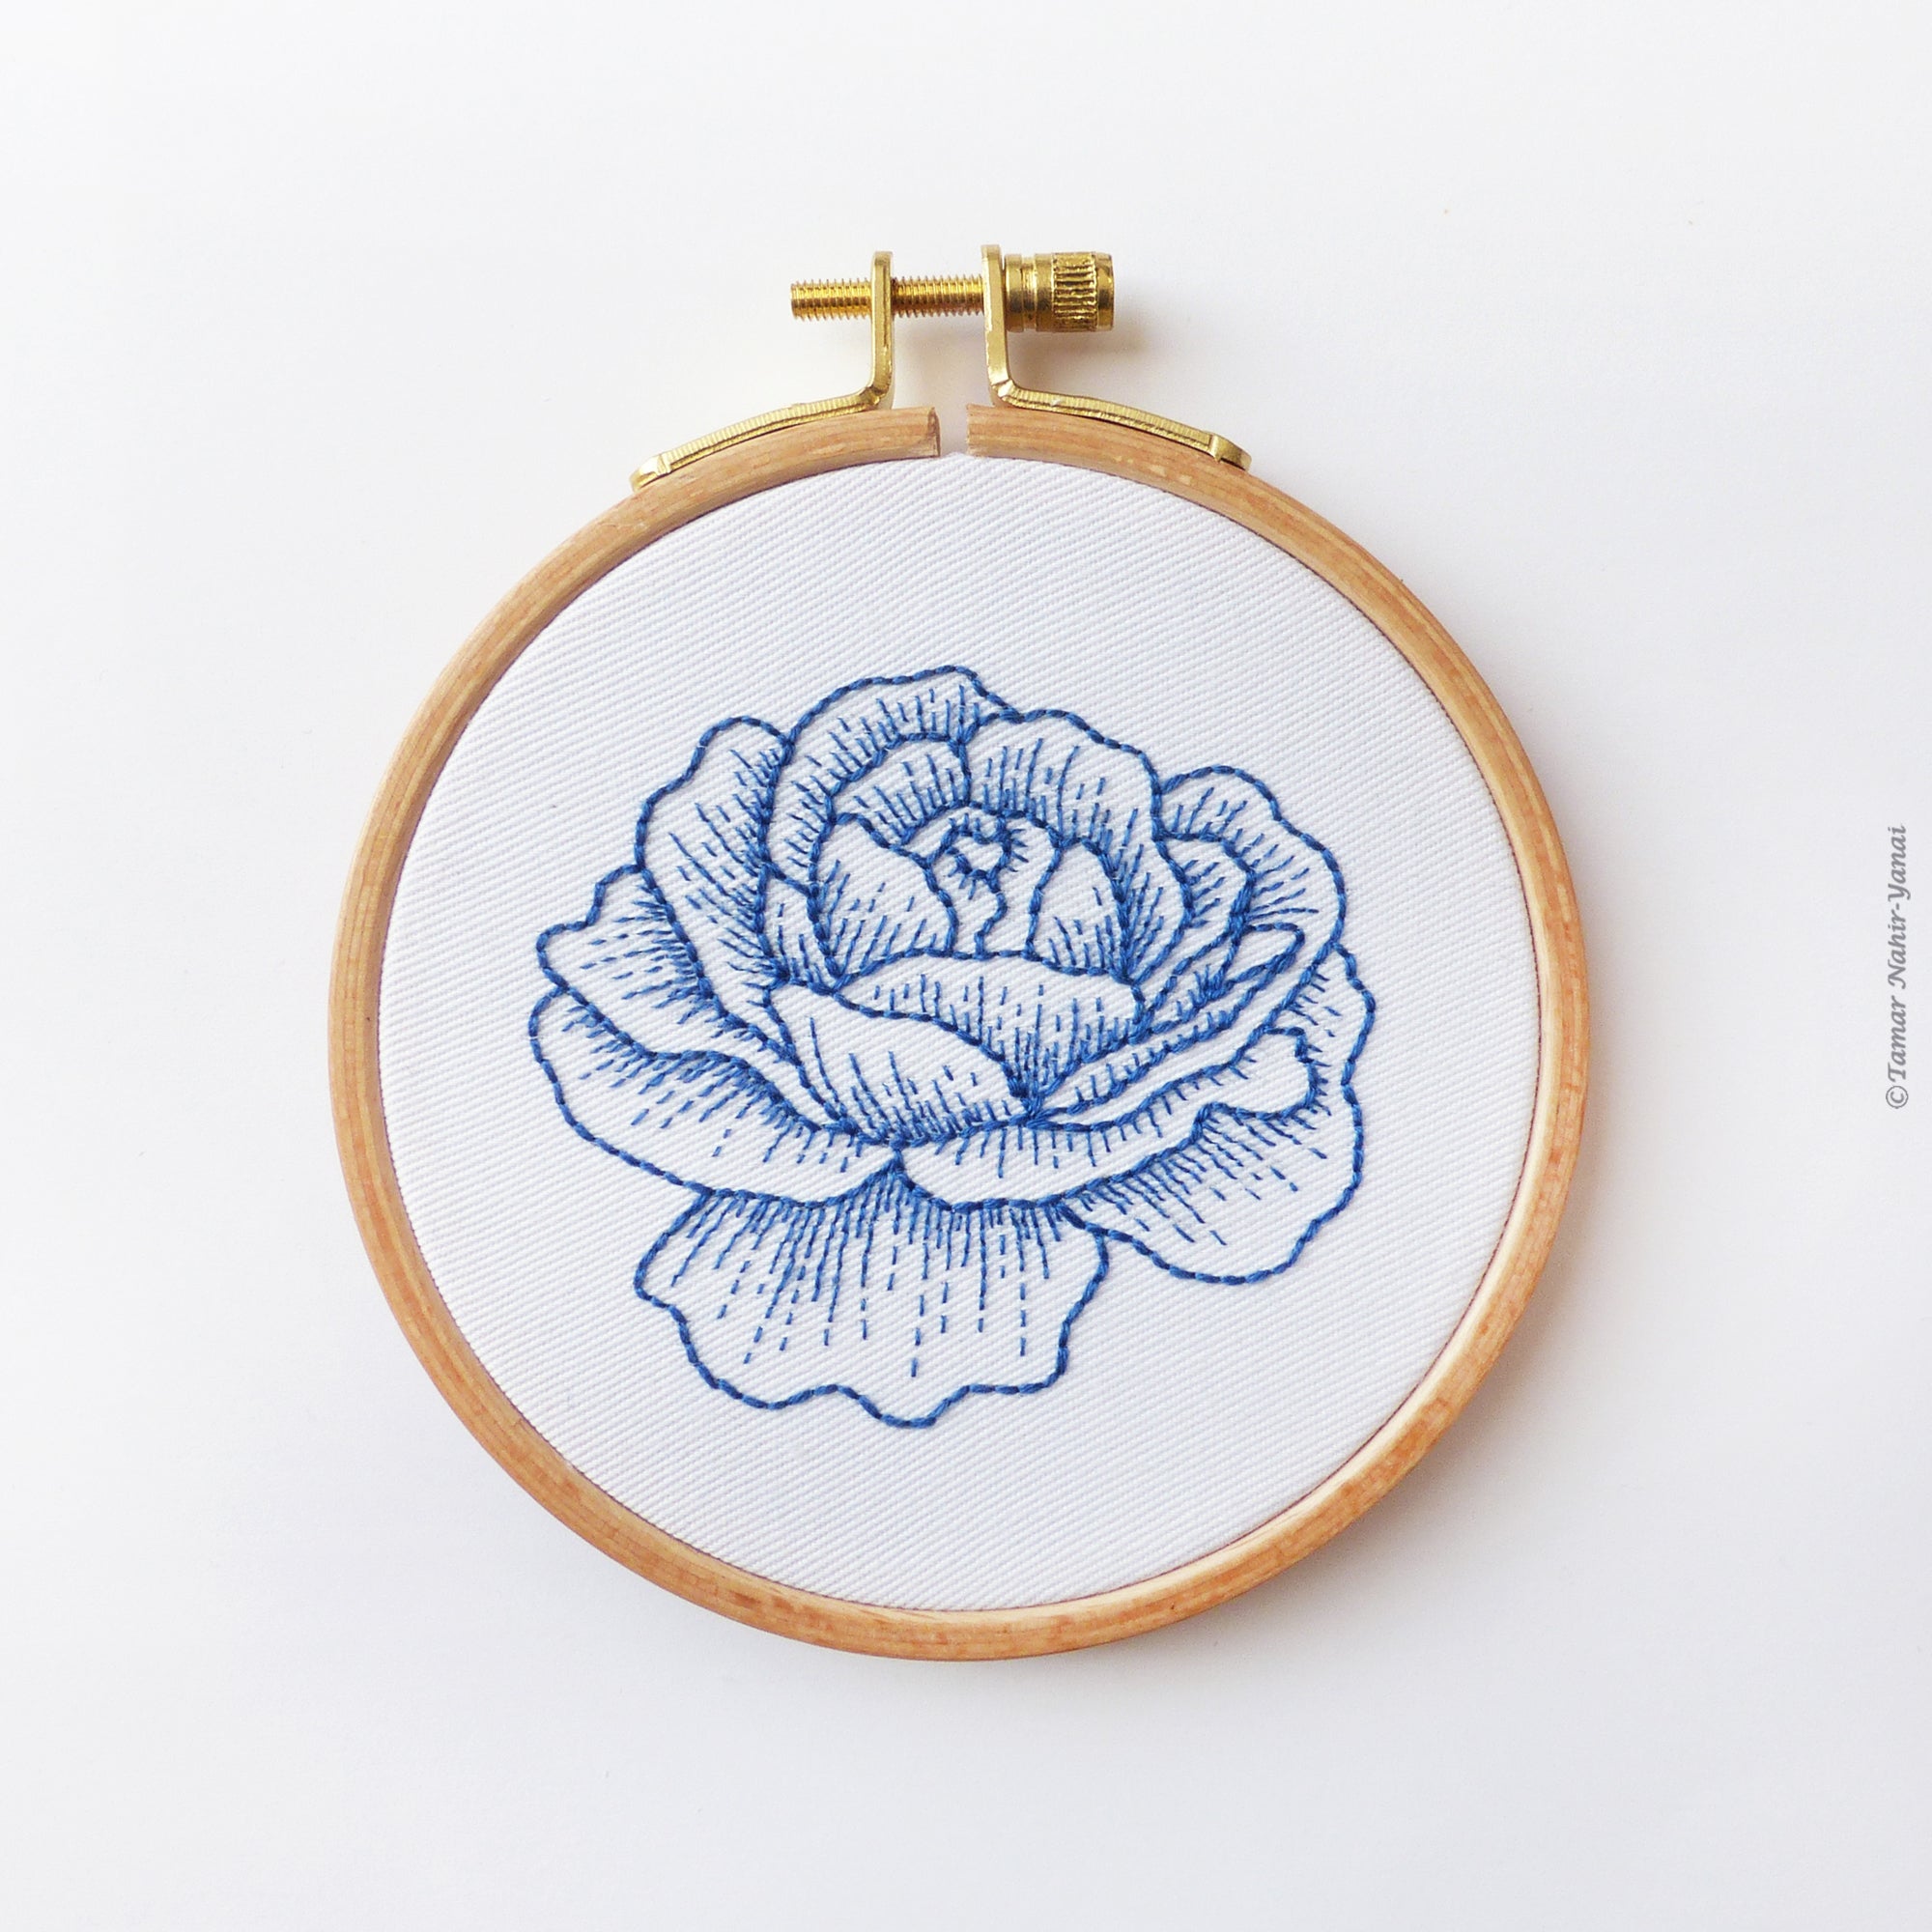 hand embroidery rose - amazing hand embroidery designs of a beautiful rose  flower 